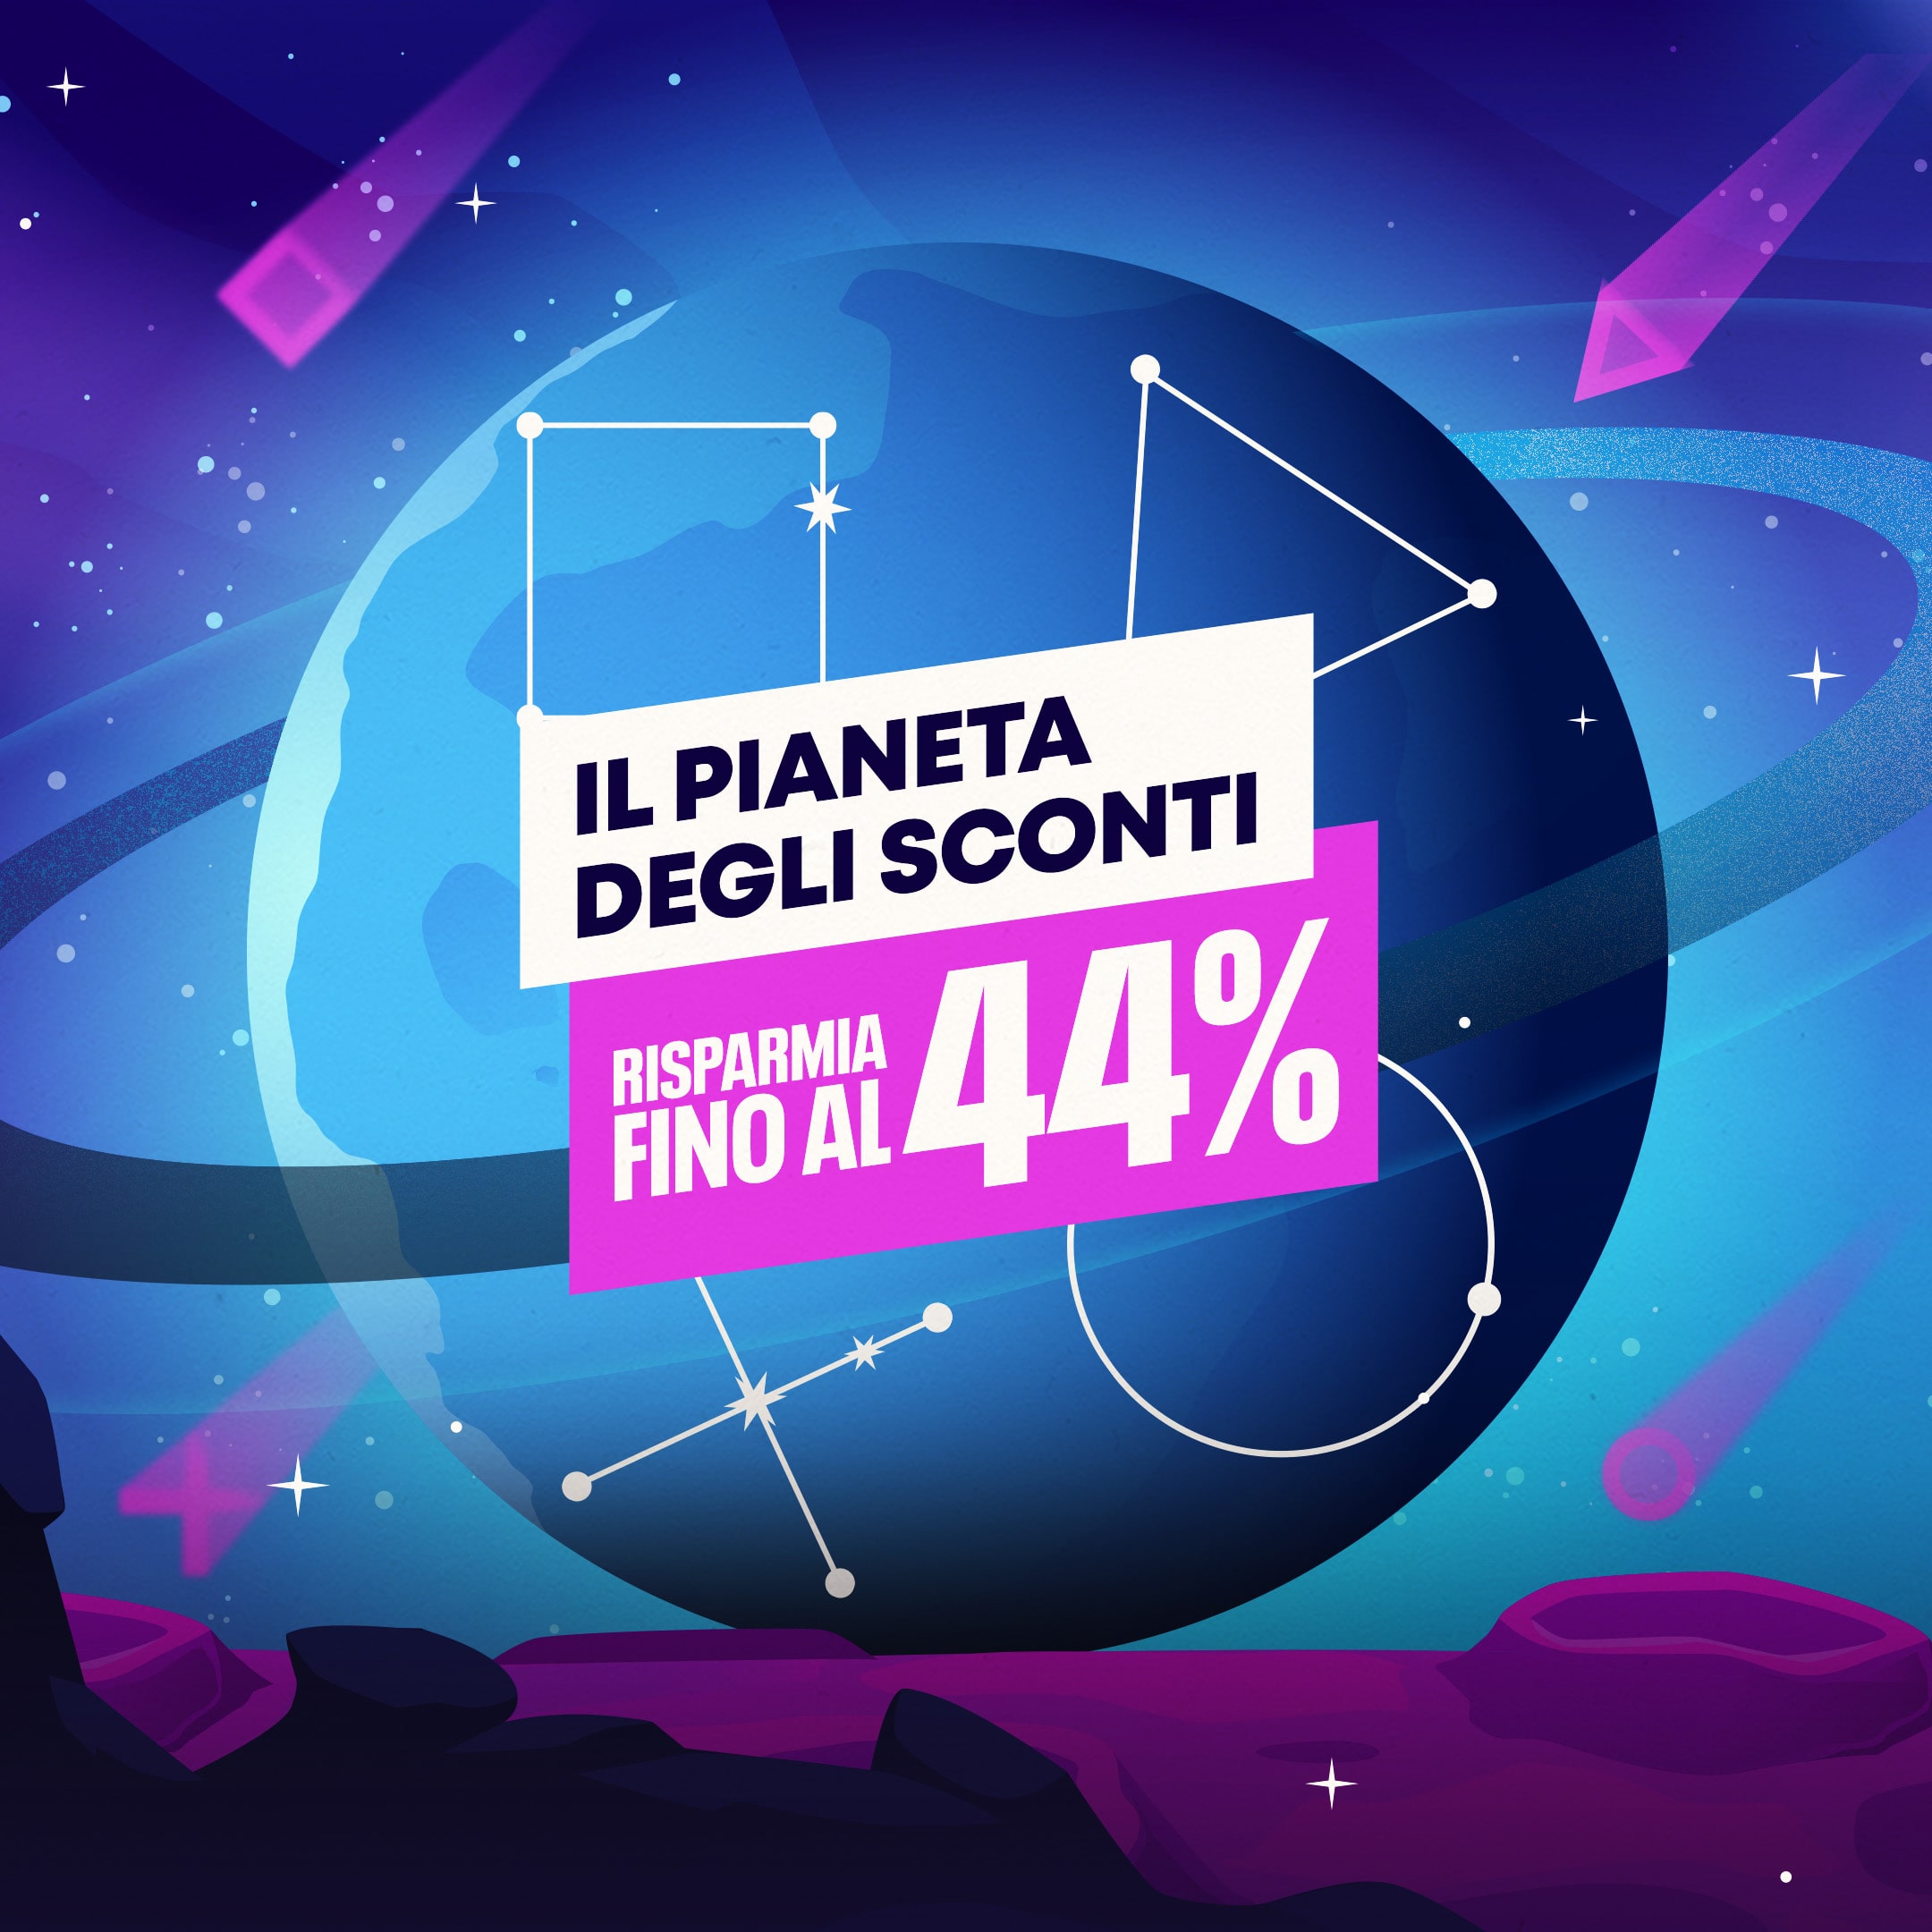 [PROMO] Planet of the Discounts - WH - A